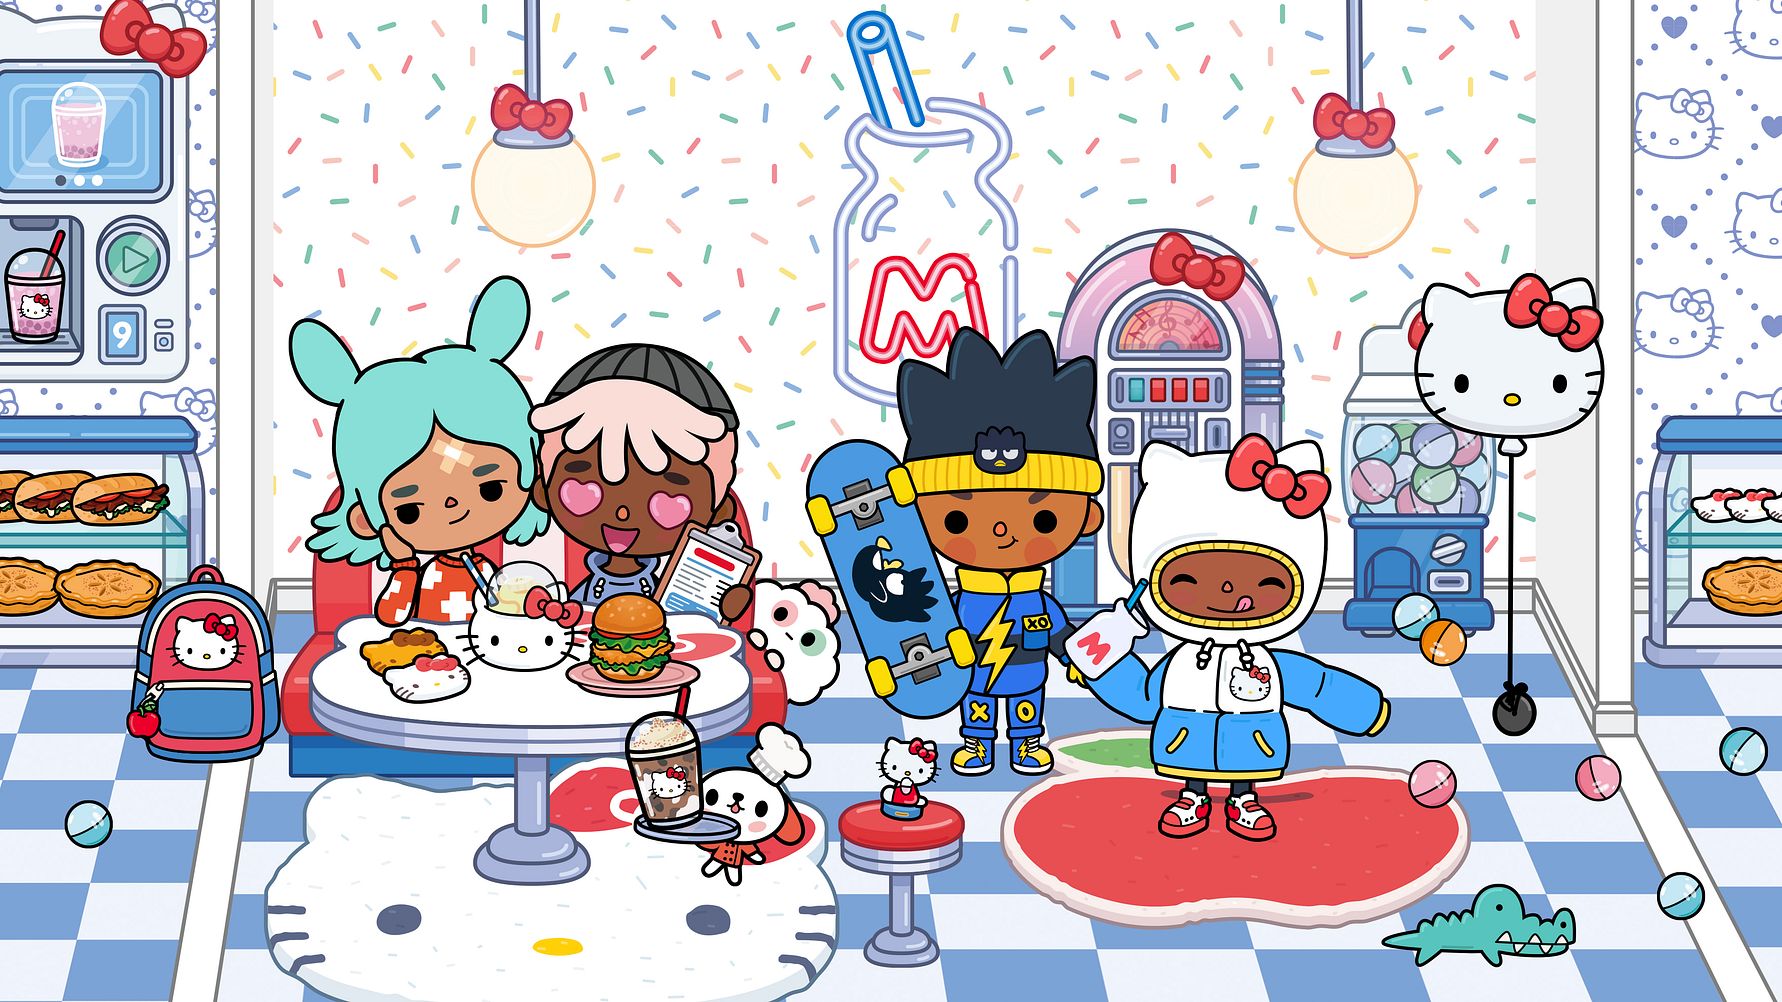 Toca Boca™ Welcomes SanrioⓇ's Hello KittyⓇ and Friends into the